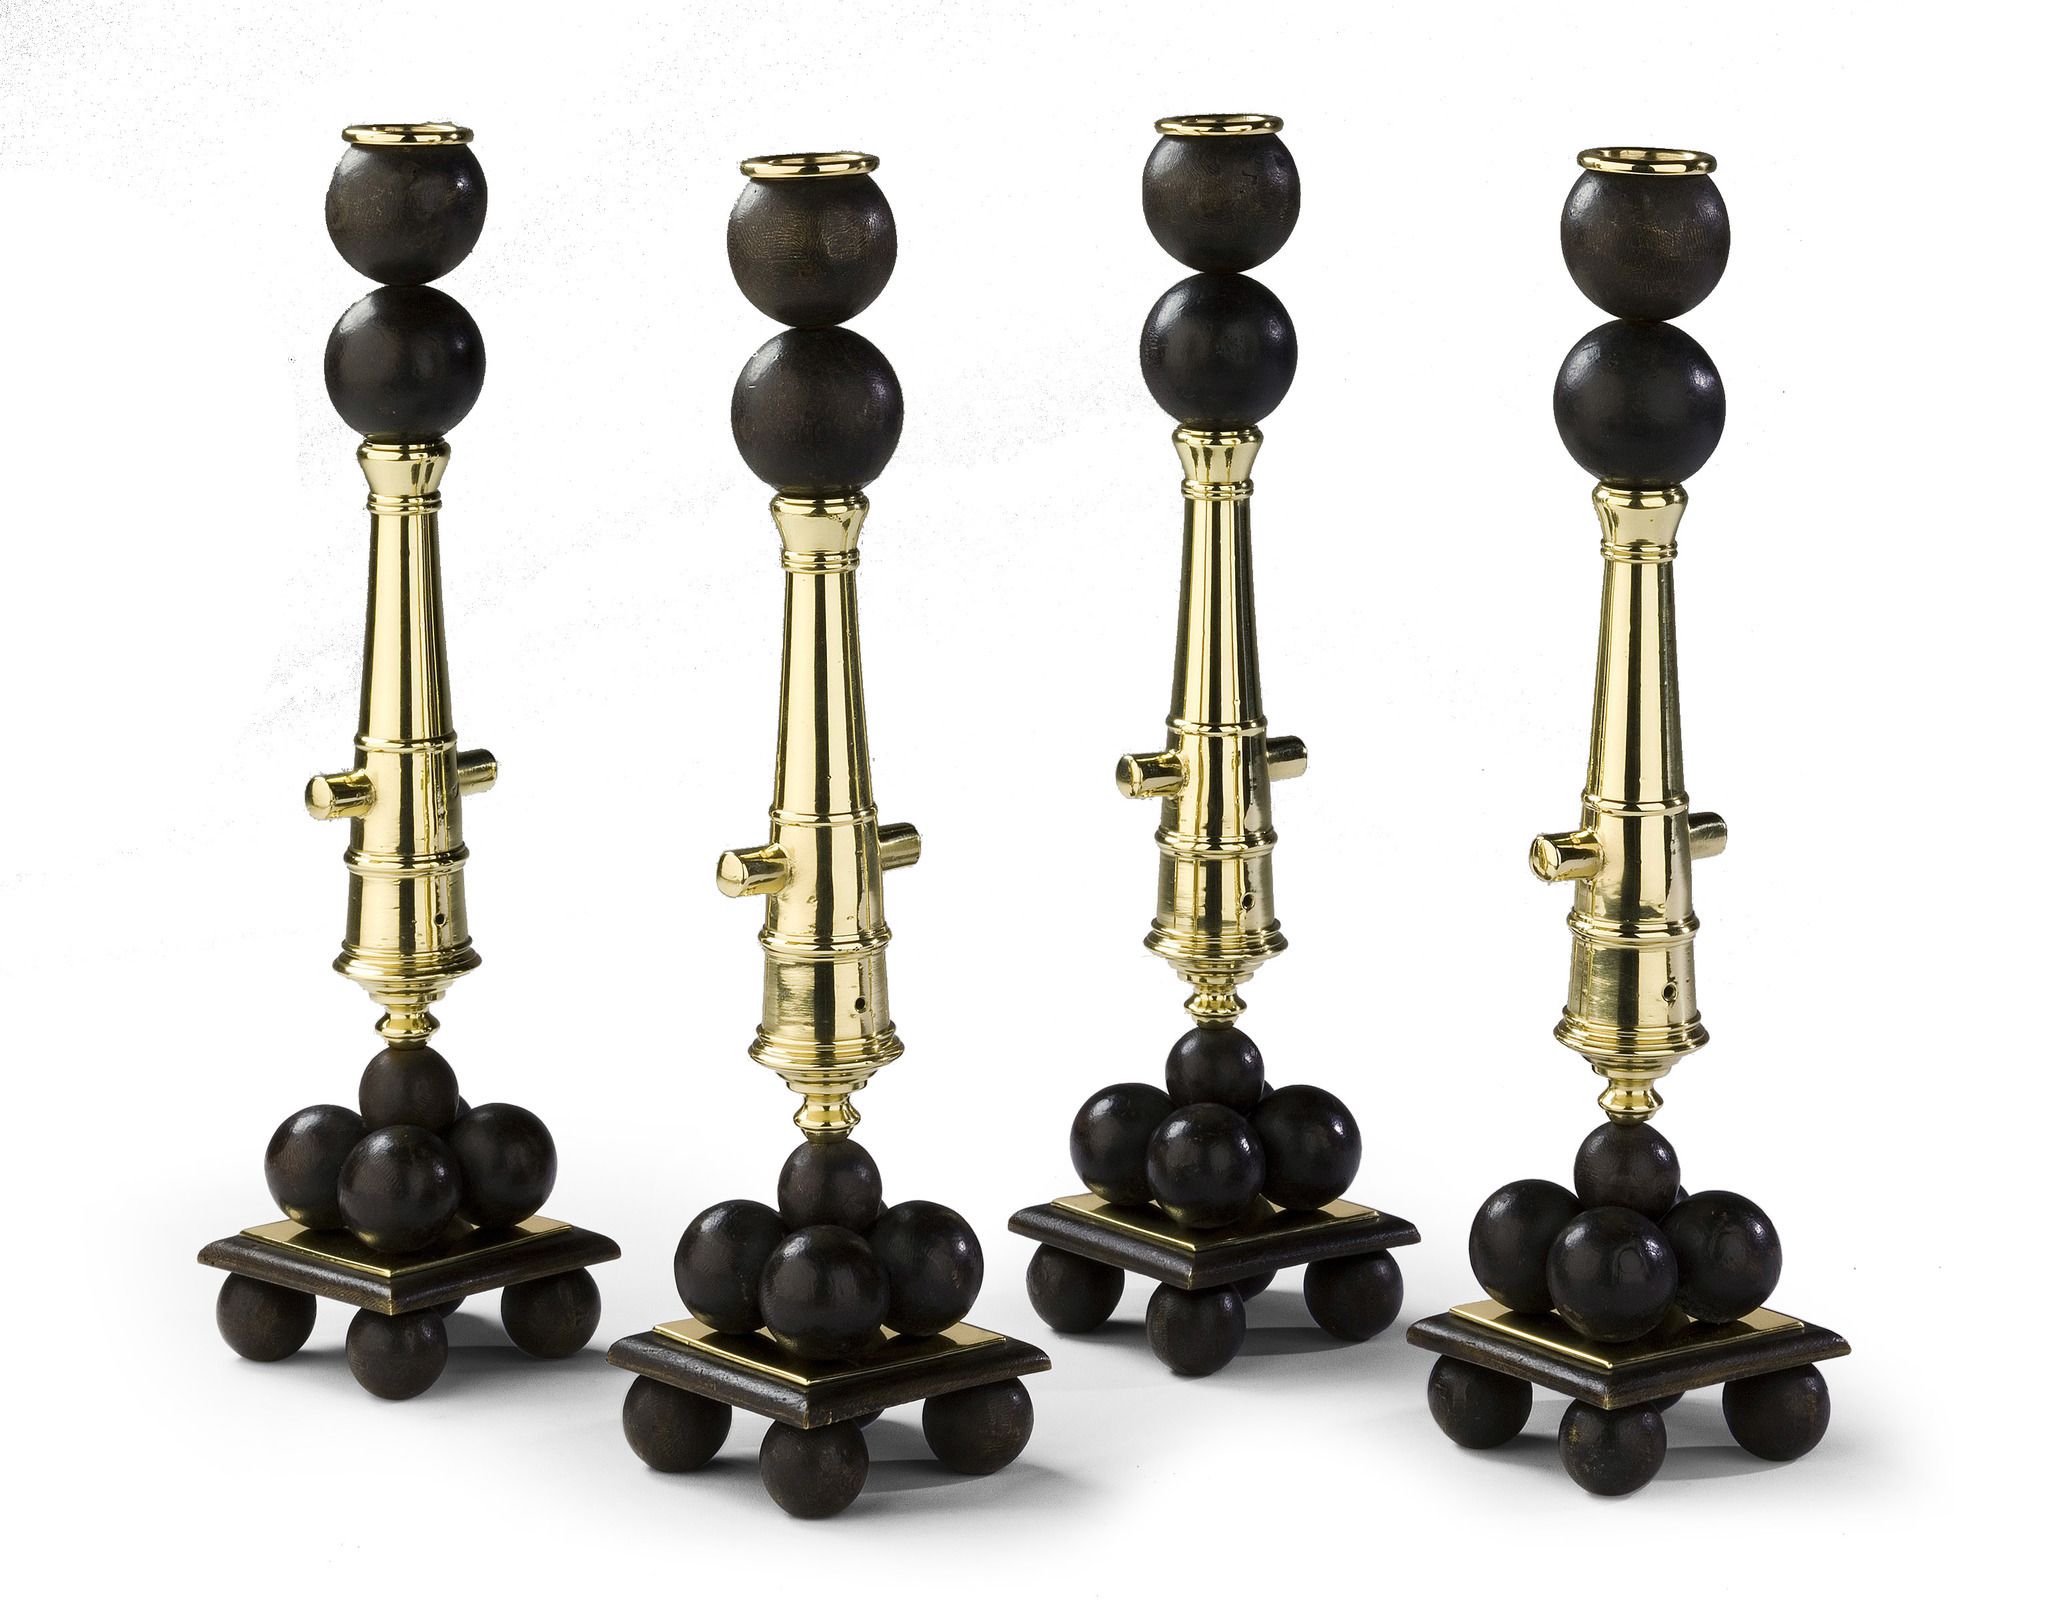 A Rare Set of Four Candlesticks 19th century, modelled in the form of cannon,      supported on a